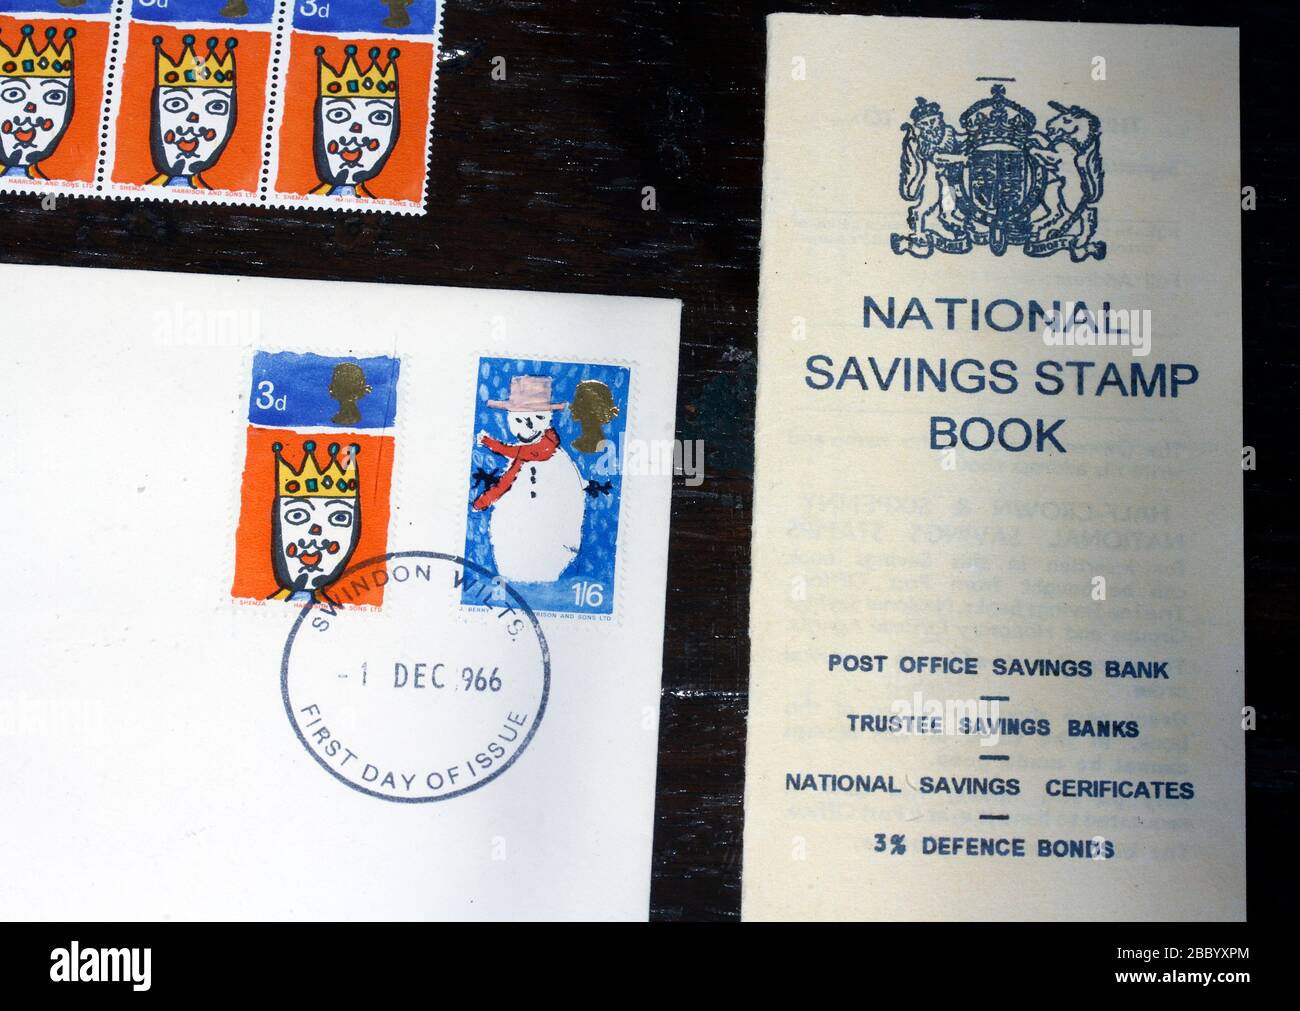 1966 Postage stamps and National Sacings Stamp Book The Brookfields Post Office, recreating a provincil post office counter of the 1960's Stock Photo